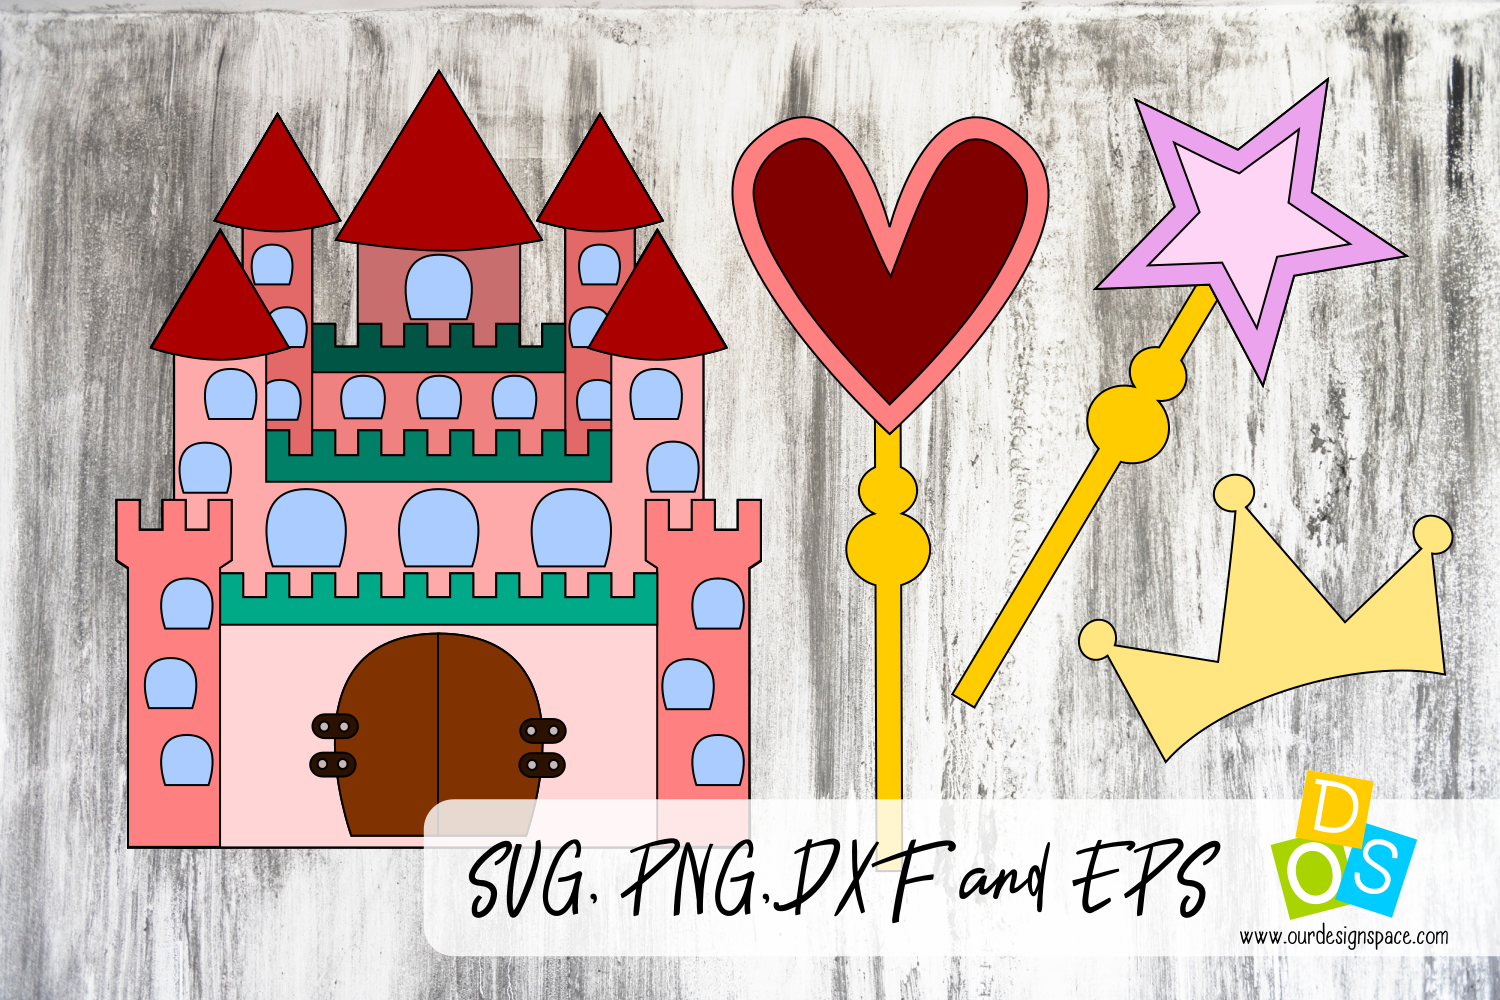 Download Princess Castle SVG, PNG, DXF and EPS